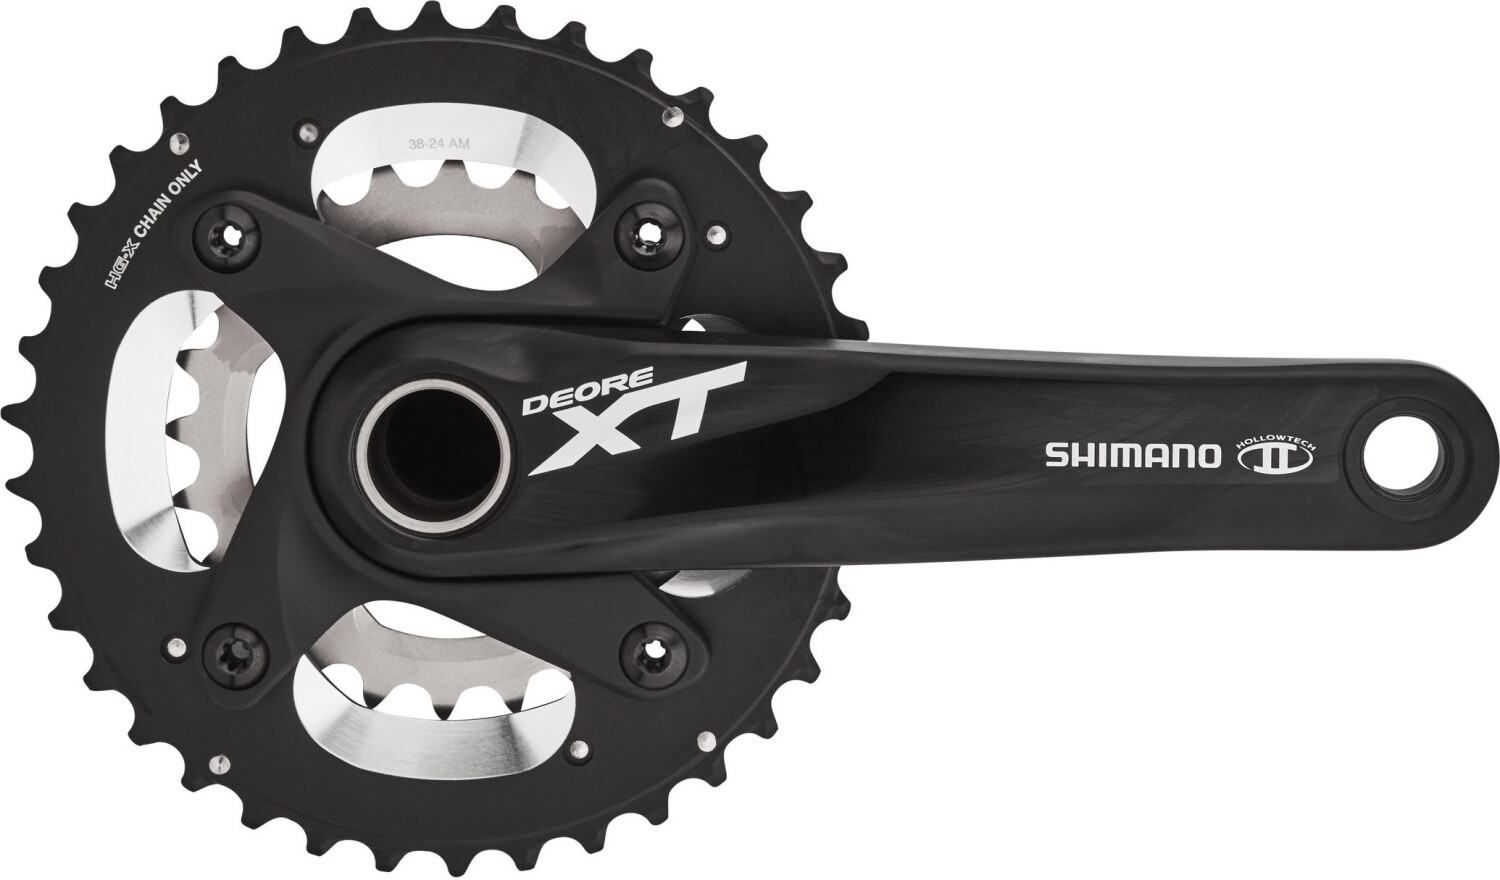 Buy Shimano Deore XT FC-M785 from £162.49 (Today) – Best Deals on 